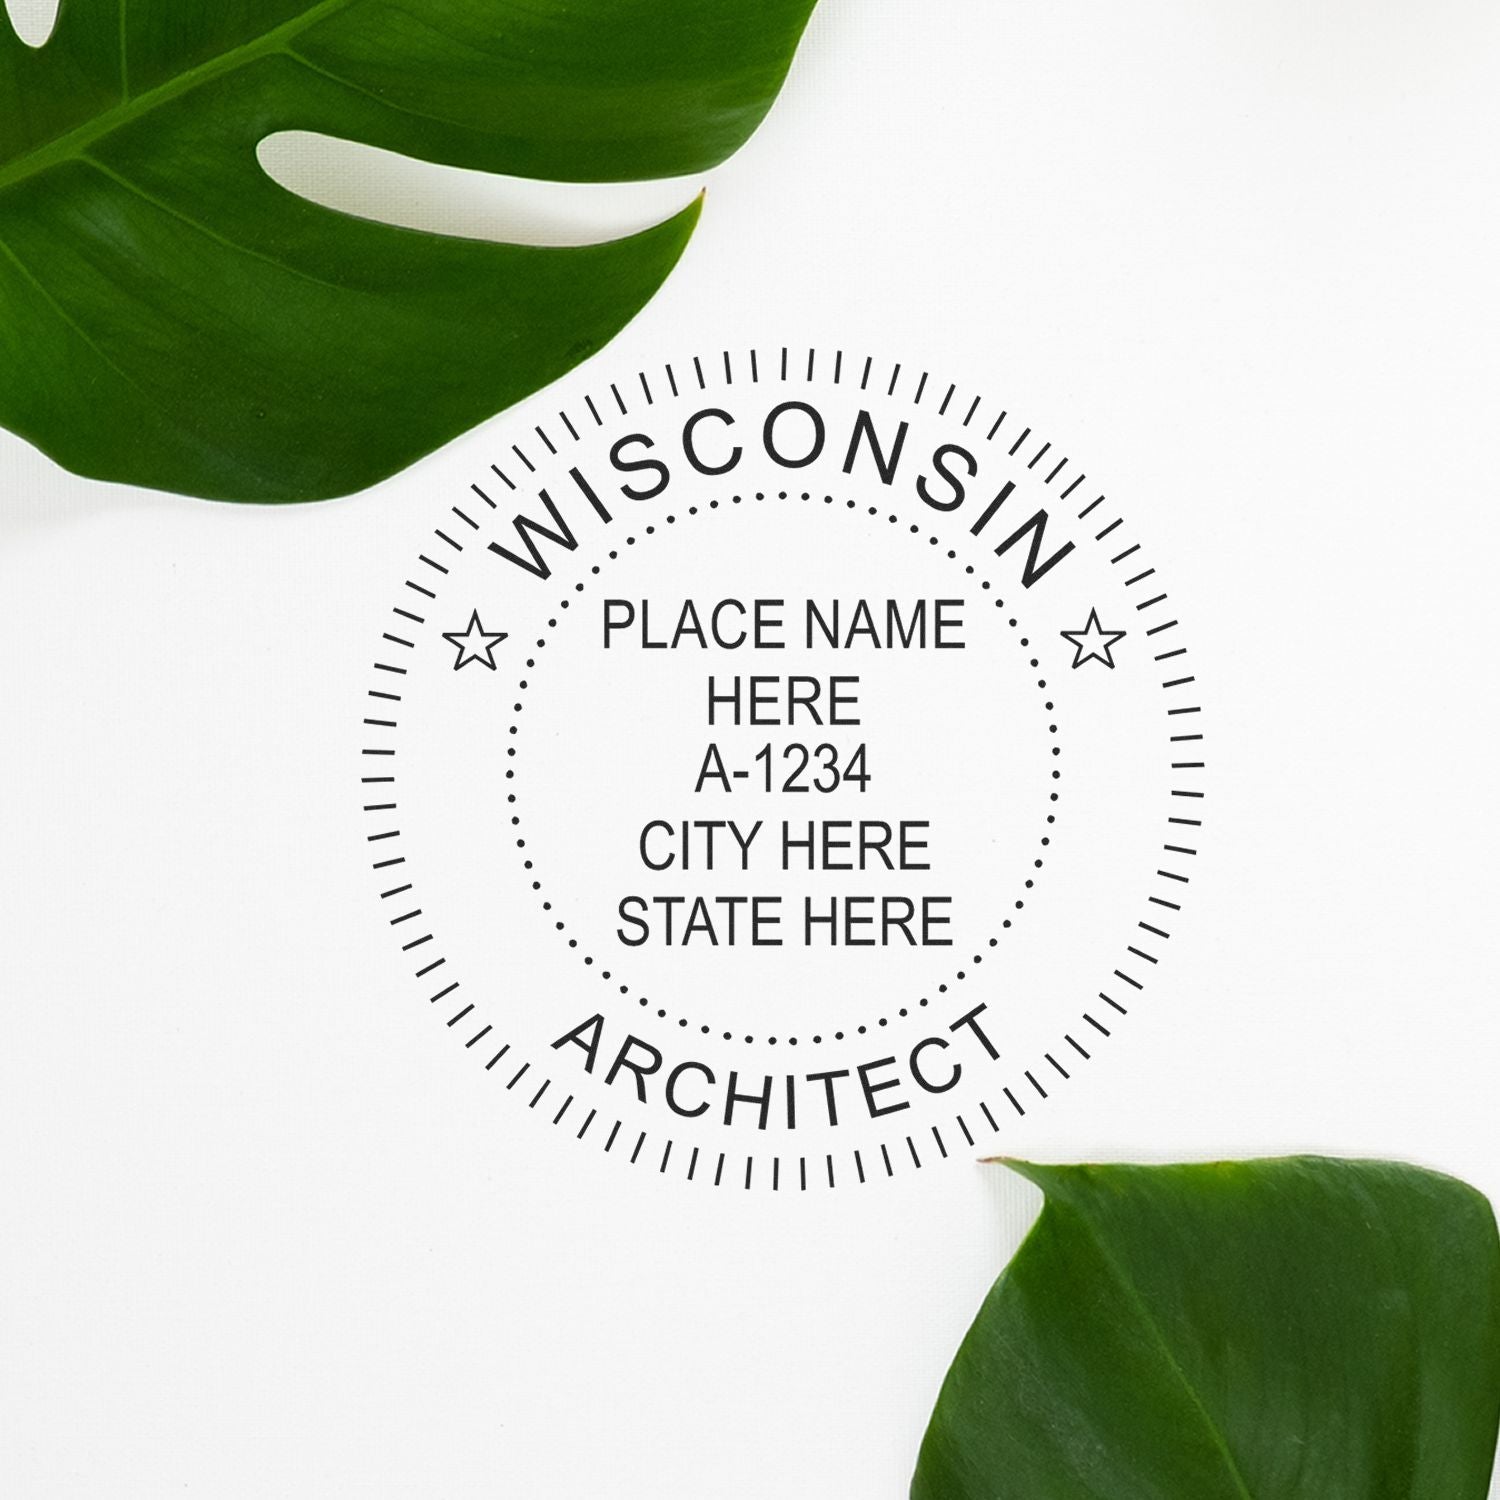 Wisconsin Architect Stamp Guidelines Decoded: Achieve Professional Excellence Feature Image